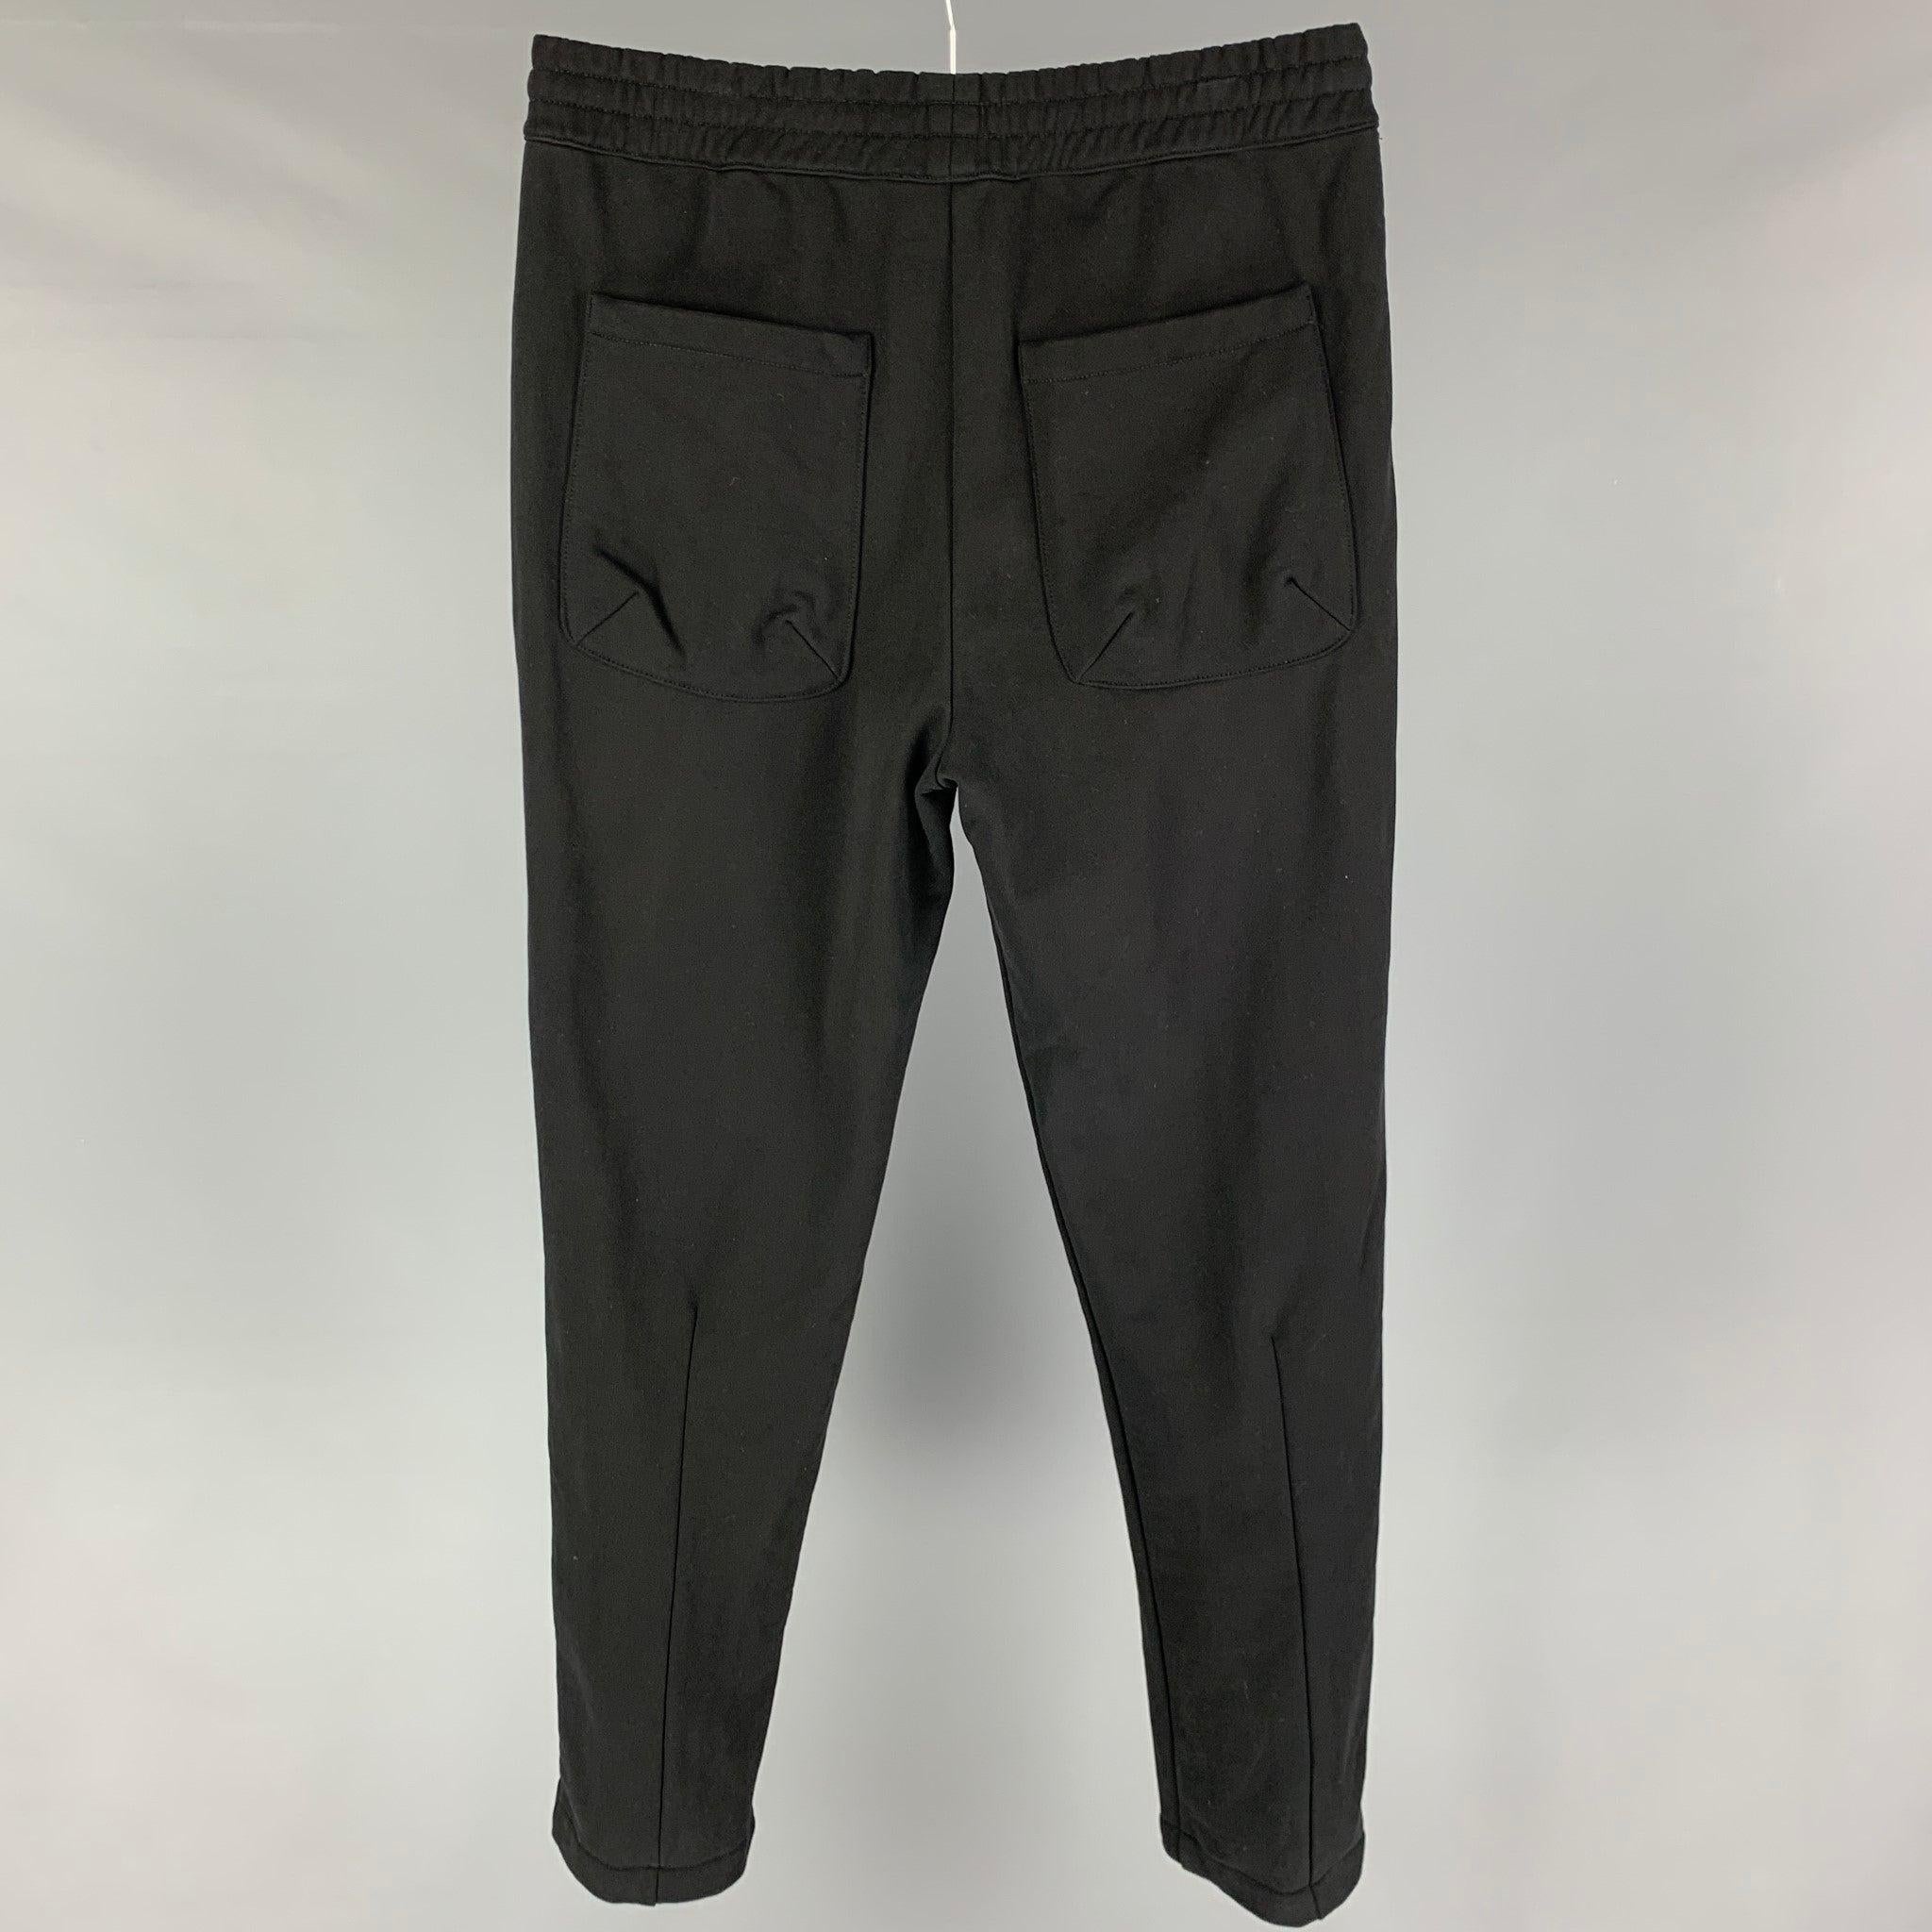 HELMUT LANG pants comes in a black cotton featuring a pleated style, elastic waistband, and a zip fly closure.
Excellent
Pre-Owned Condition. 

Marked:   S 

Measurements: 
  Waist: 30 inches Rise: 12 inches Inseam: 31 inches Leg Opening: 12 inches